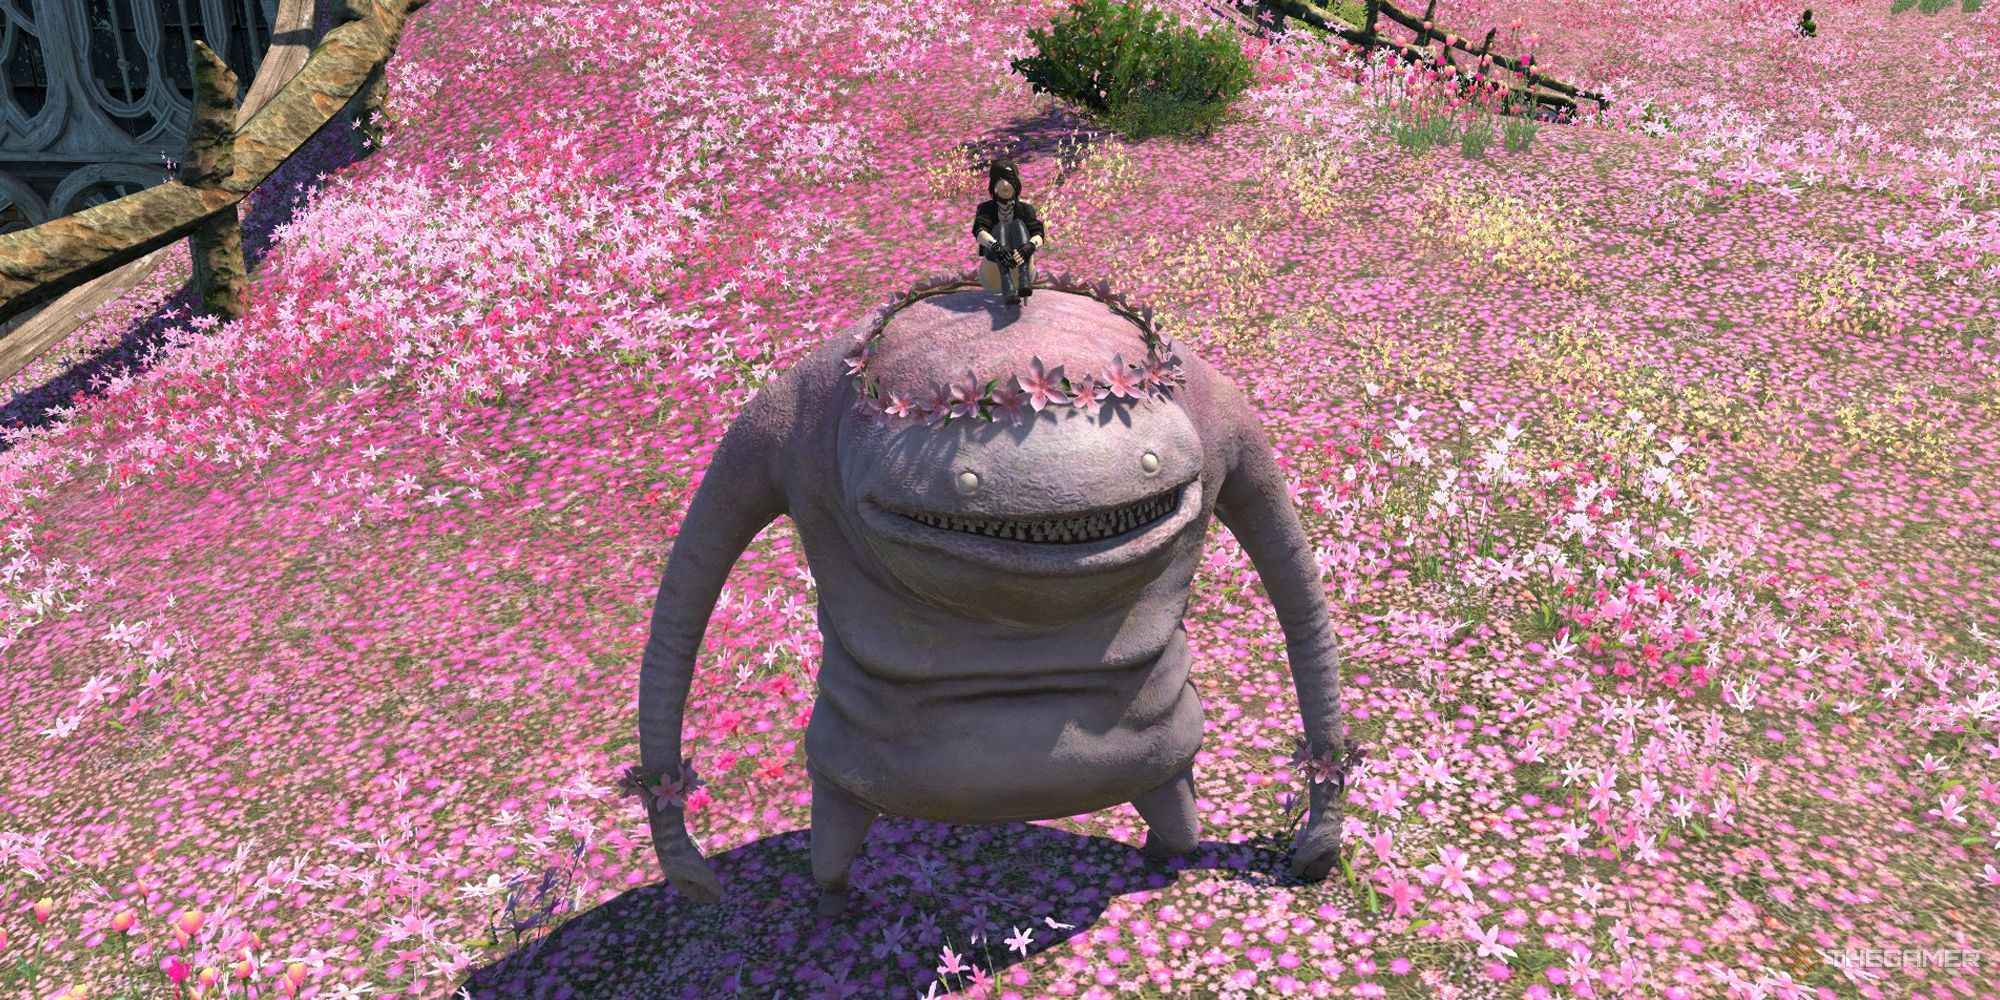 A player atop the Peatie mount in Final Fantasy 14.